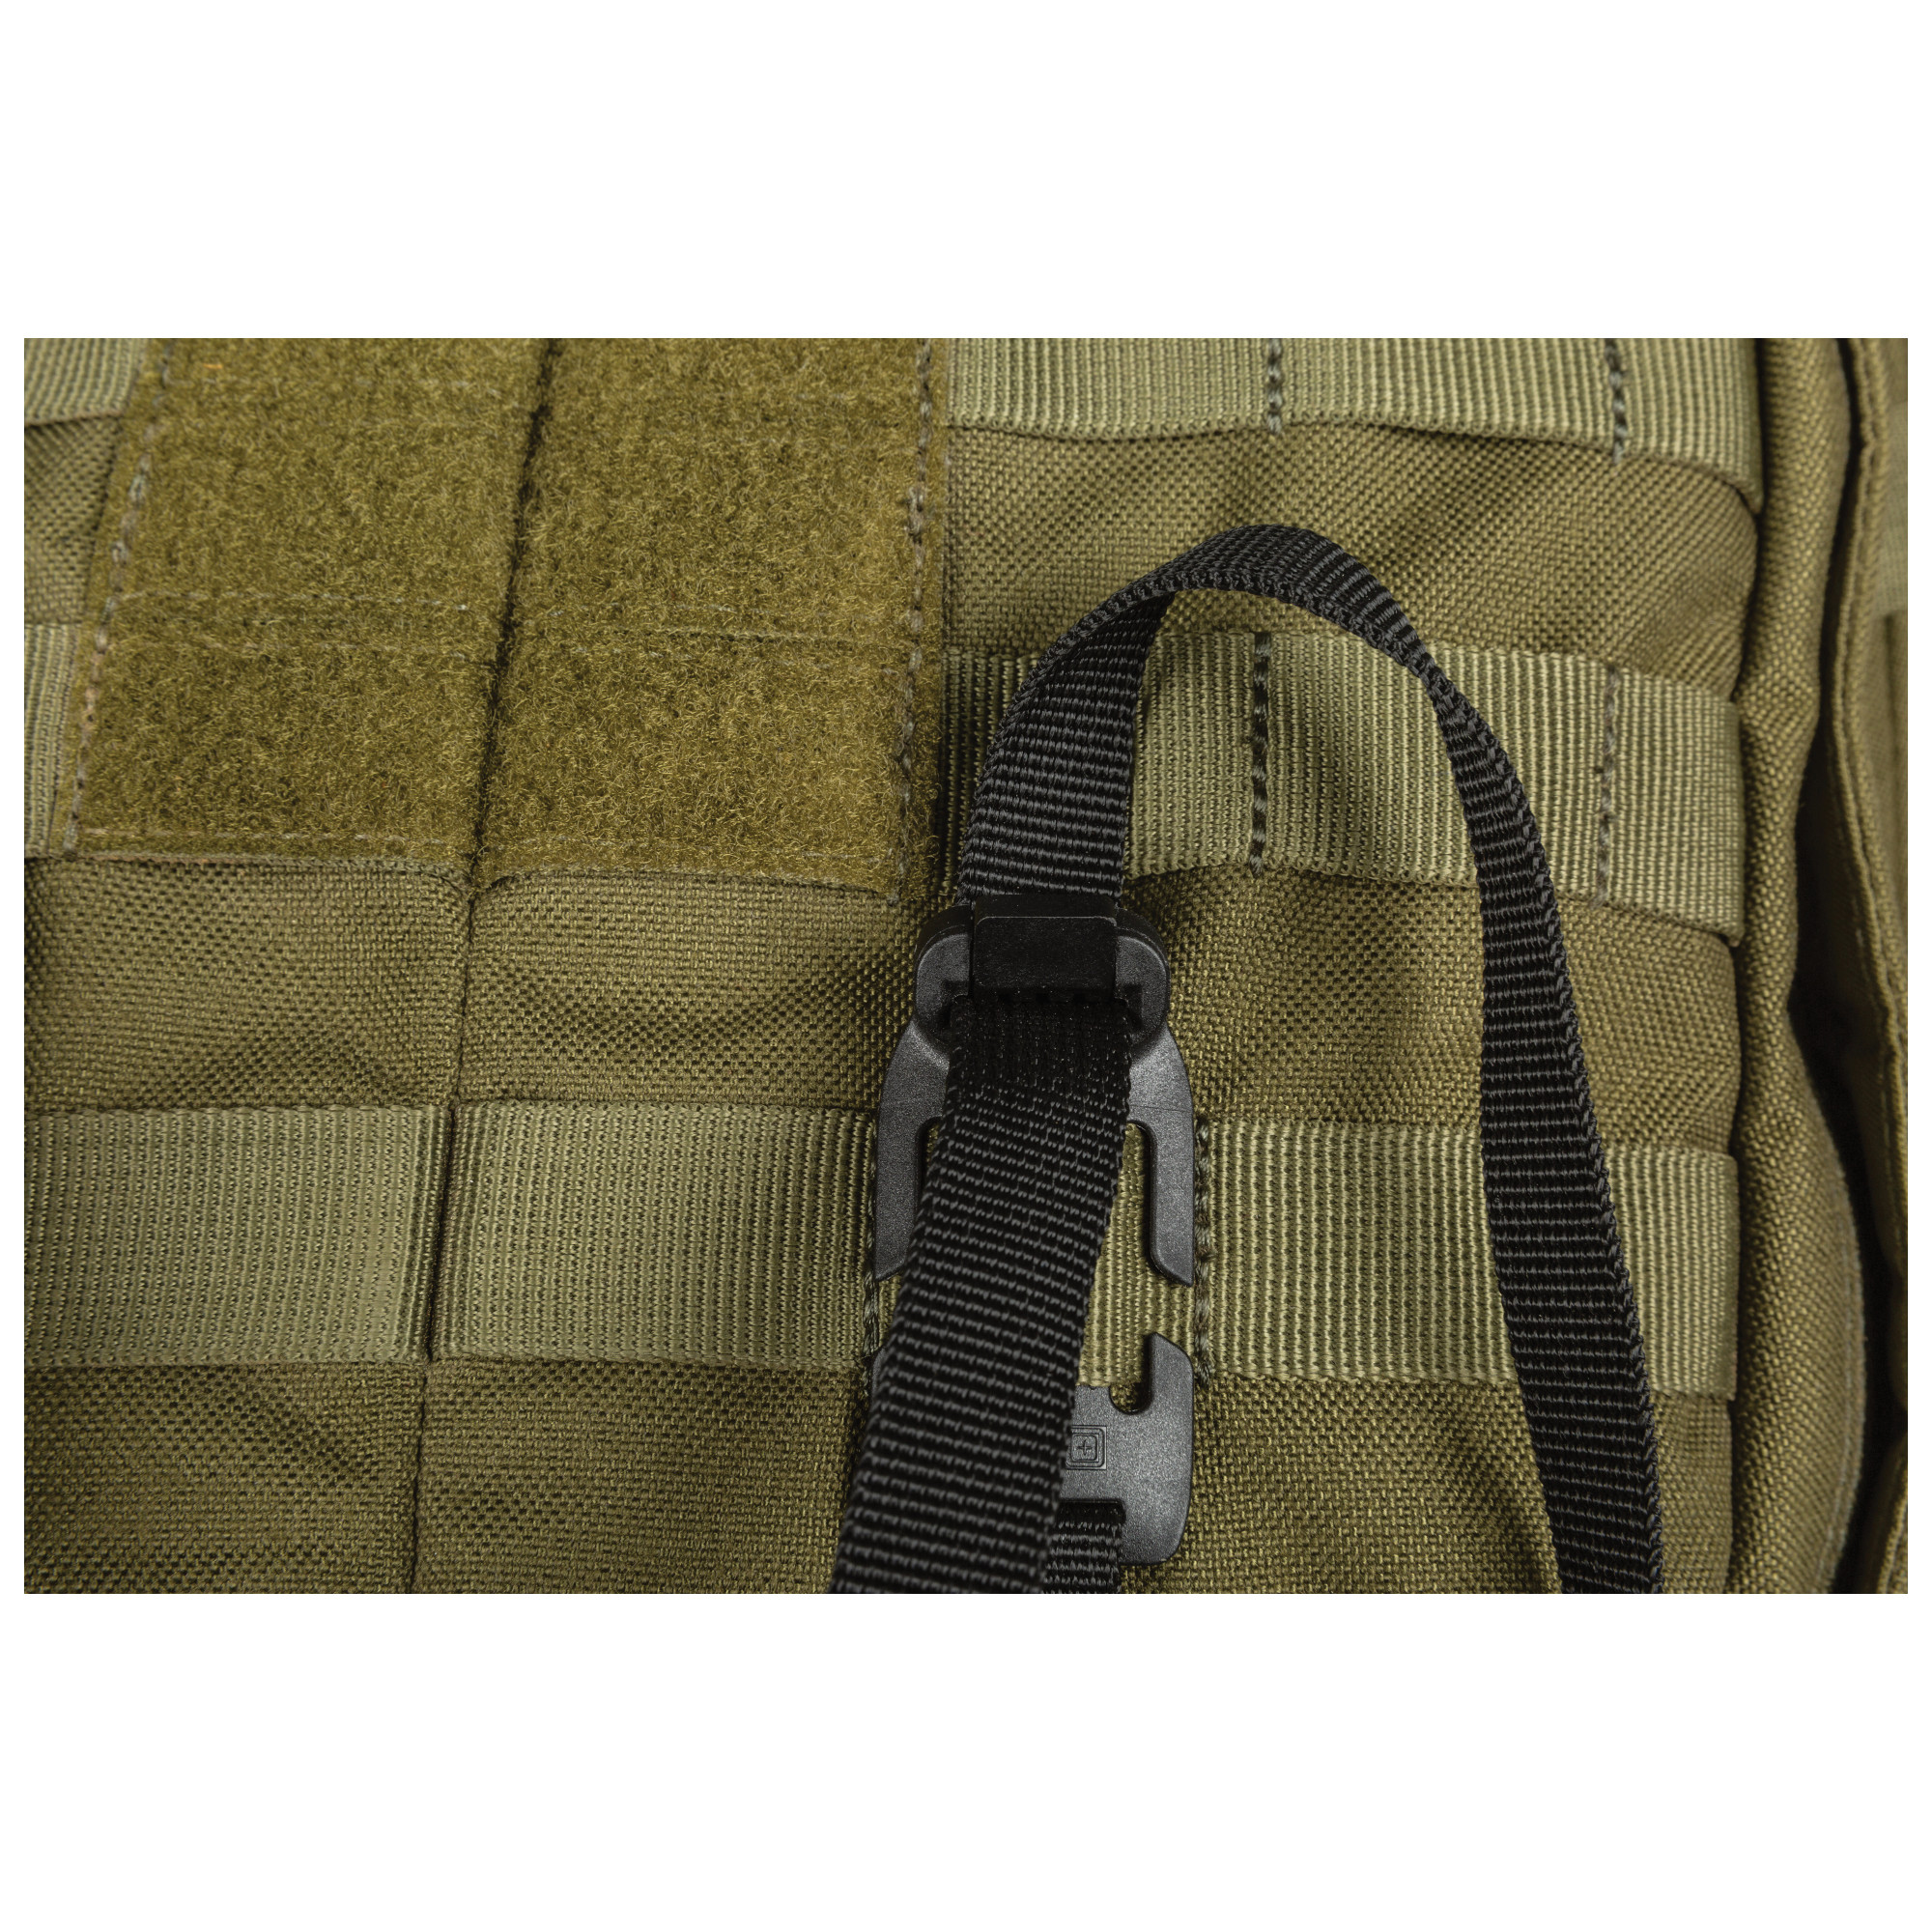 5.11 Sidewinder Straps Small – 2 pack